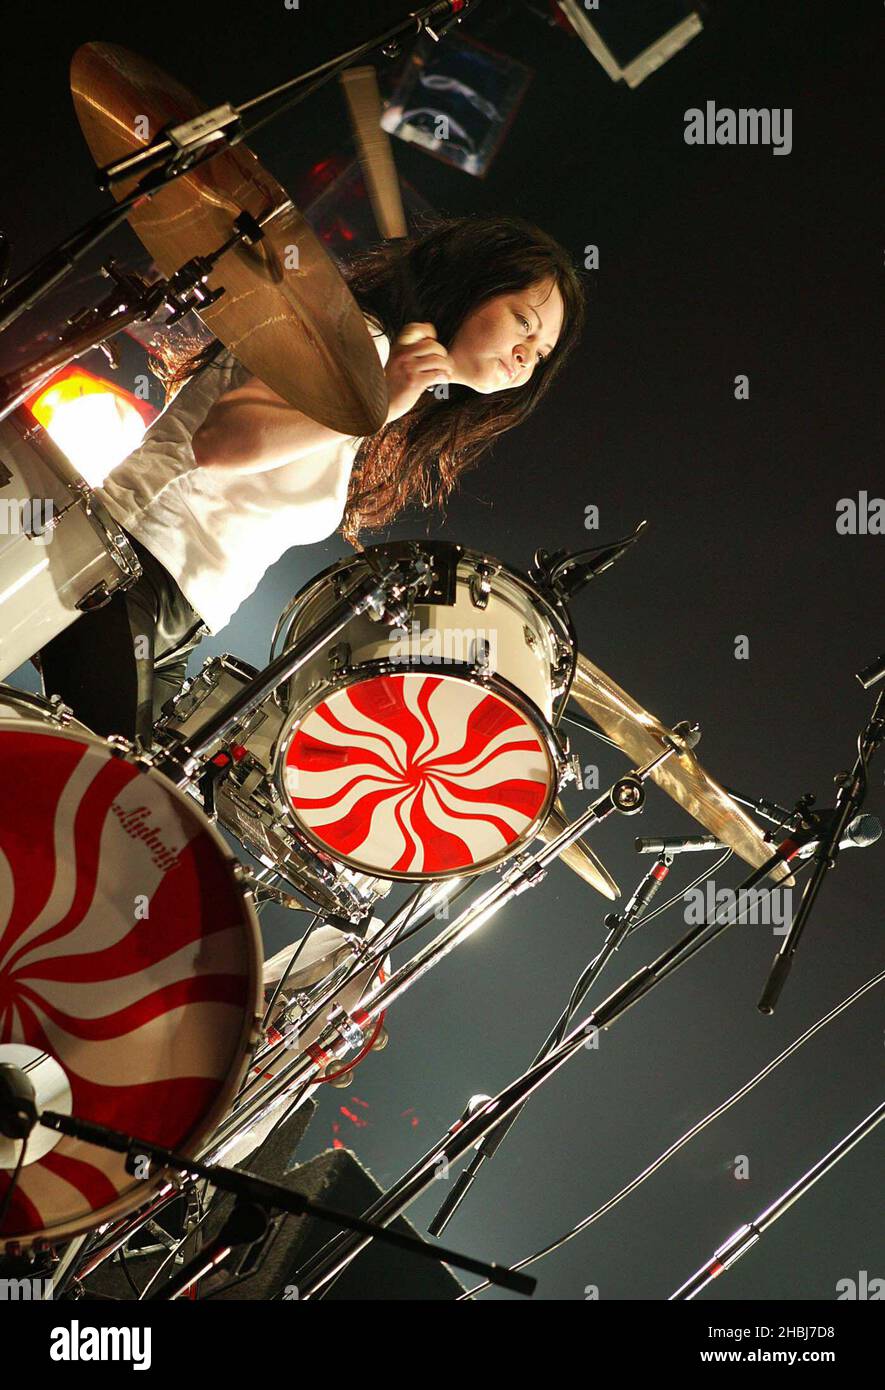 The White Stripes (Meg and Jack White)perform on stage at Carling Brixton Academy, London. (Meg White on Drums) Stock Photo